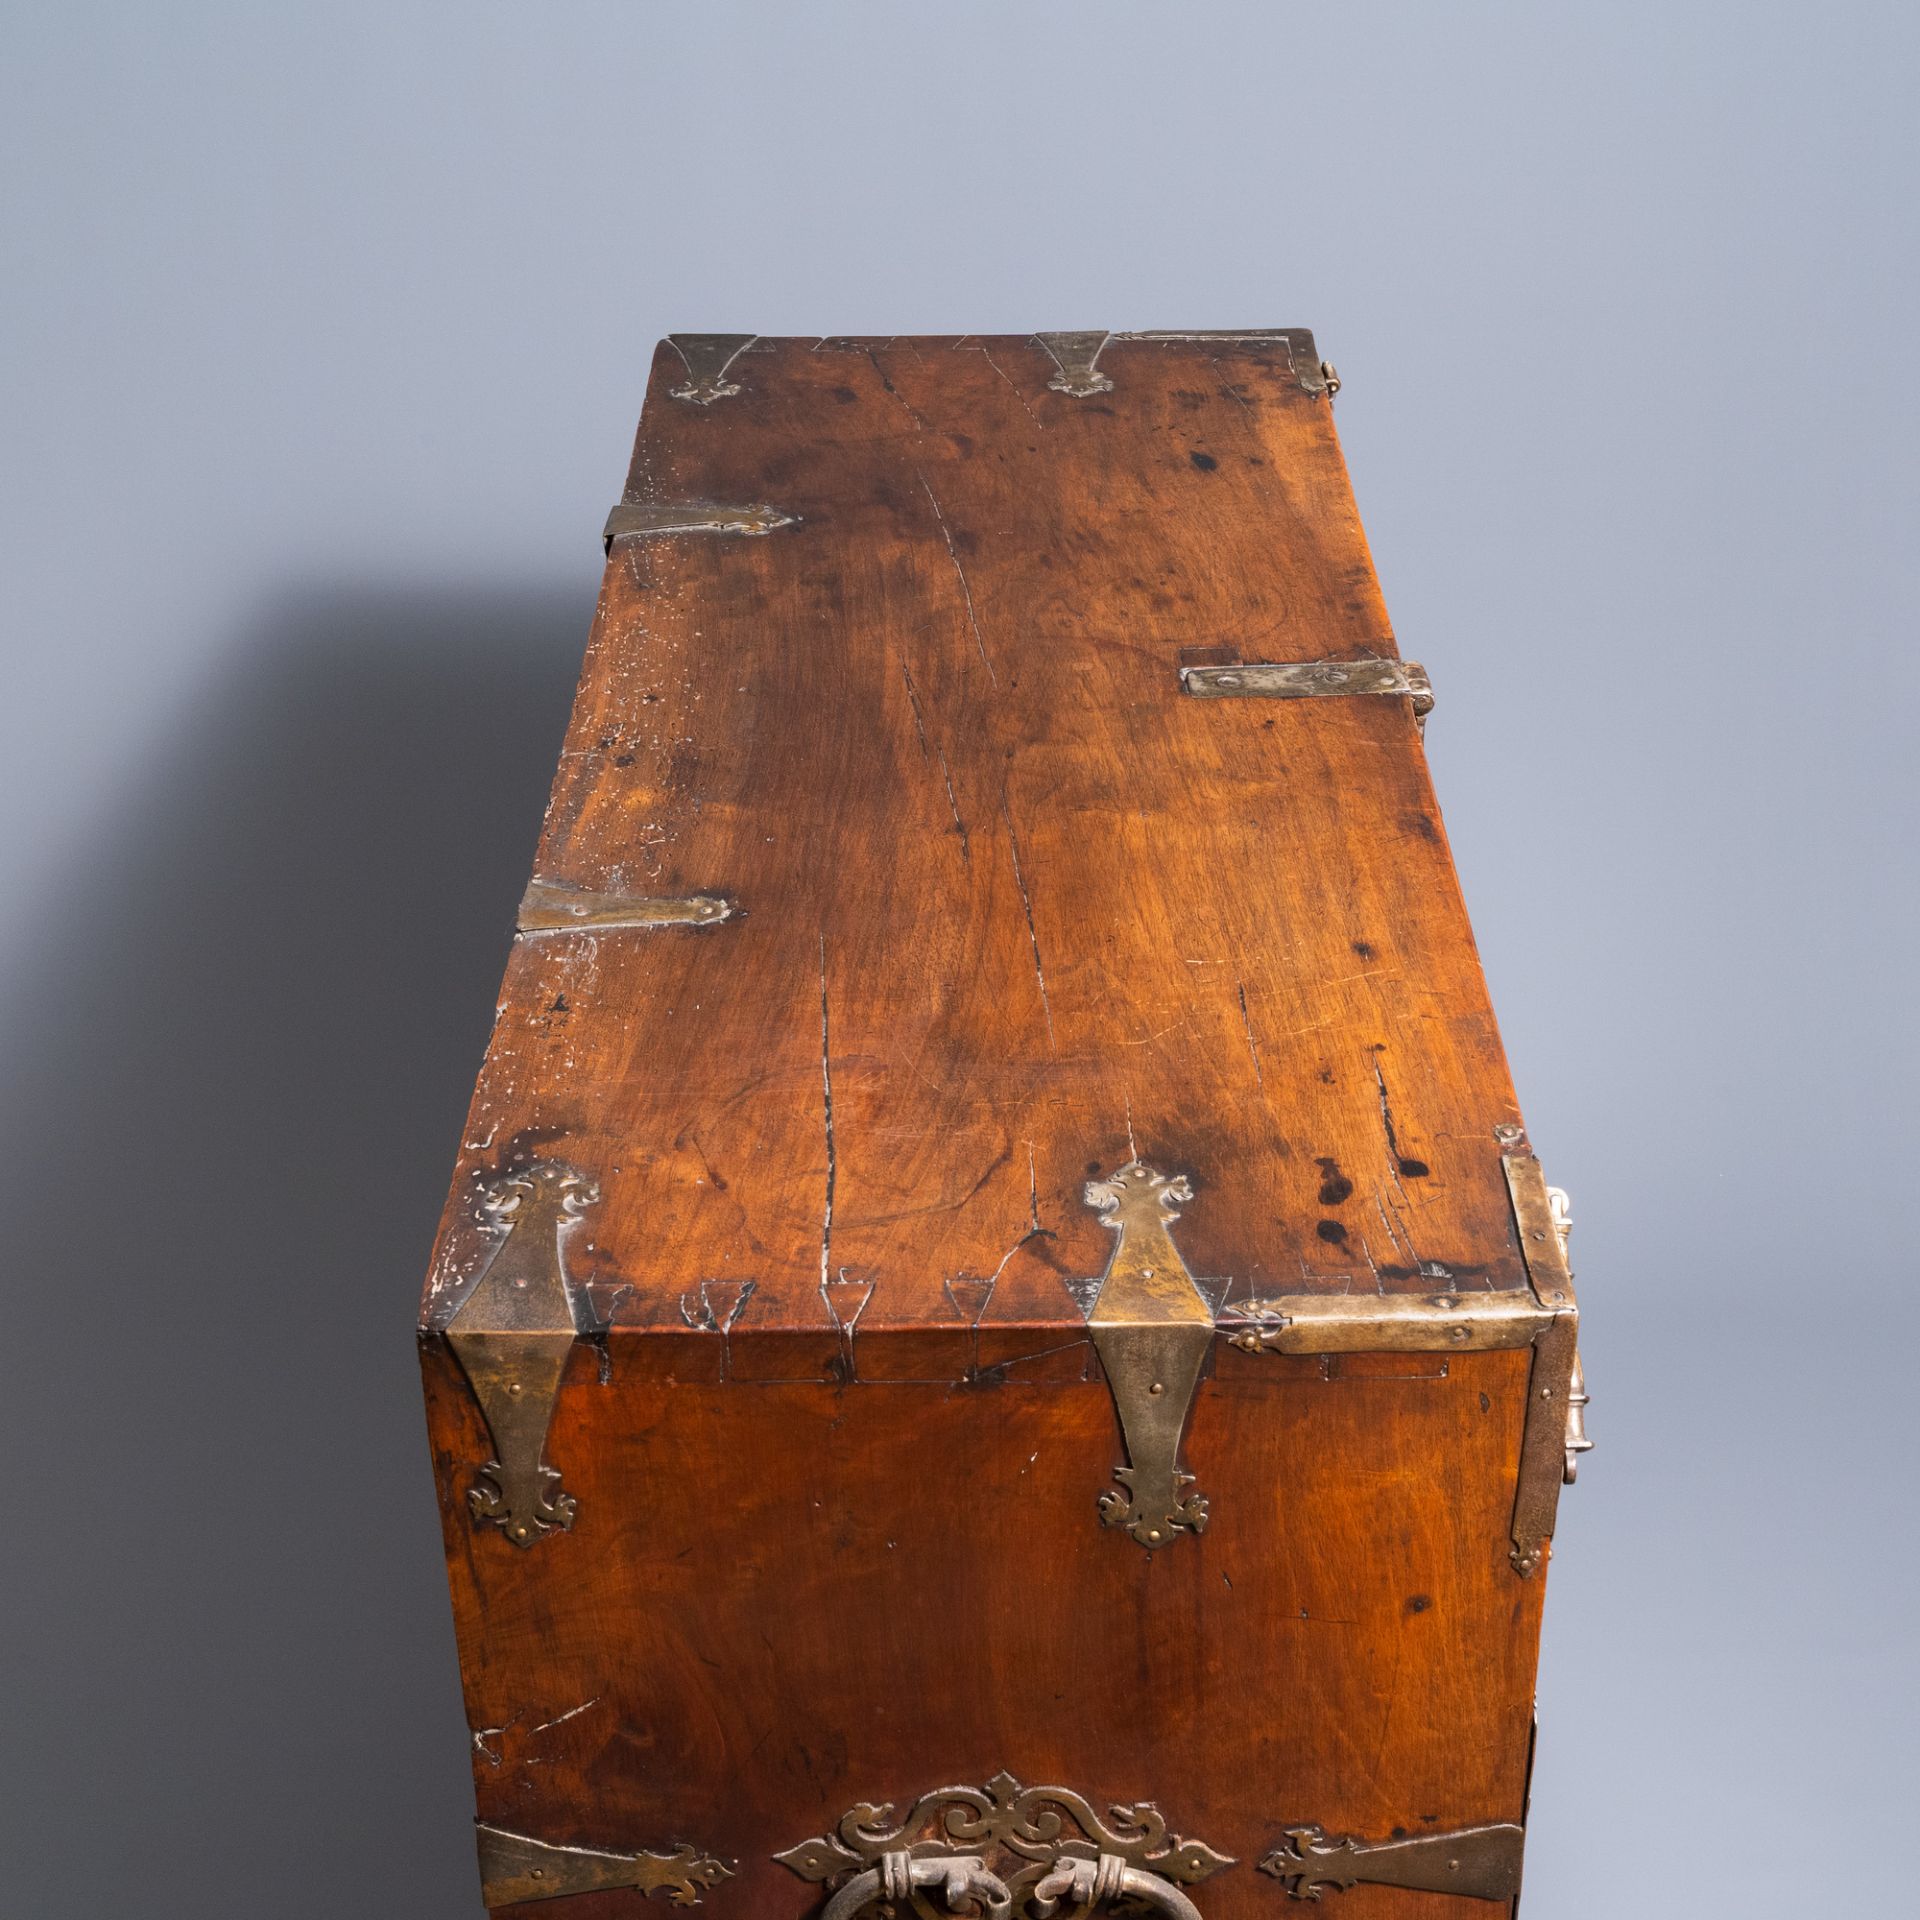 A Spanish bronze-mounted oak 'bargue–o' or cabinet on stand, 16th C. - Image 10 of 16